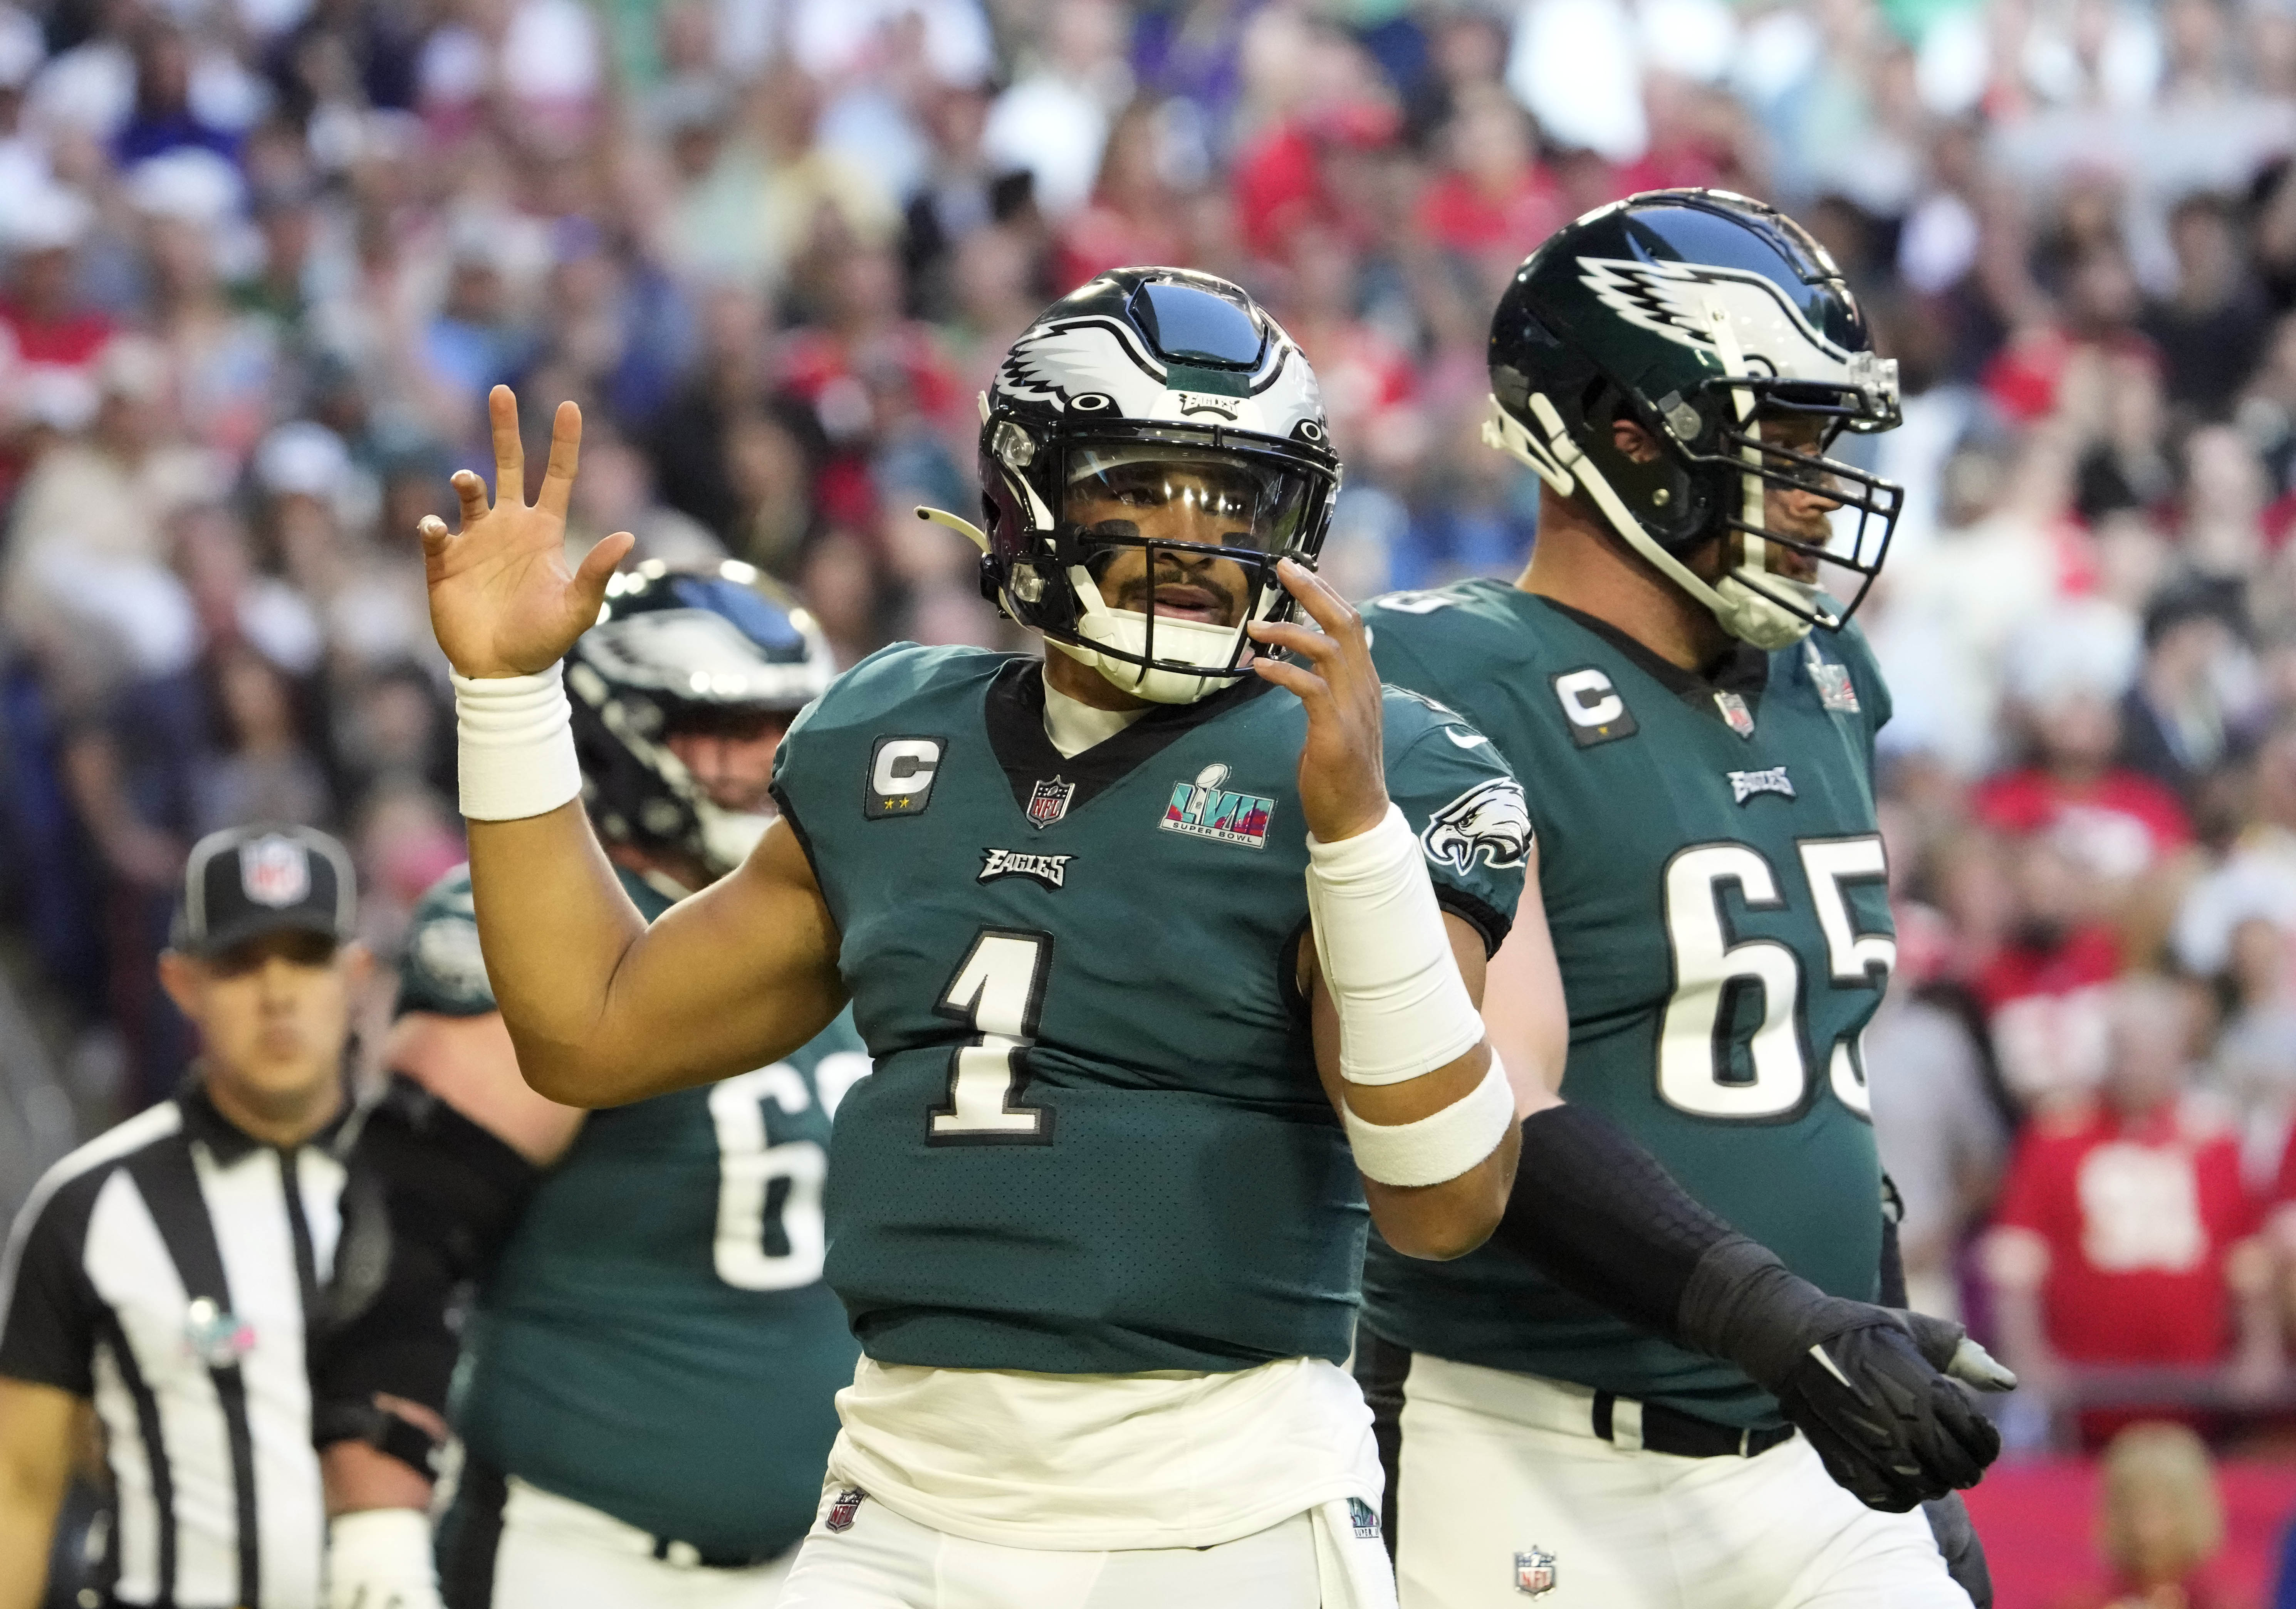 In an all-time great Super Bowl, the Eagles weren't good enough